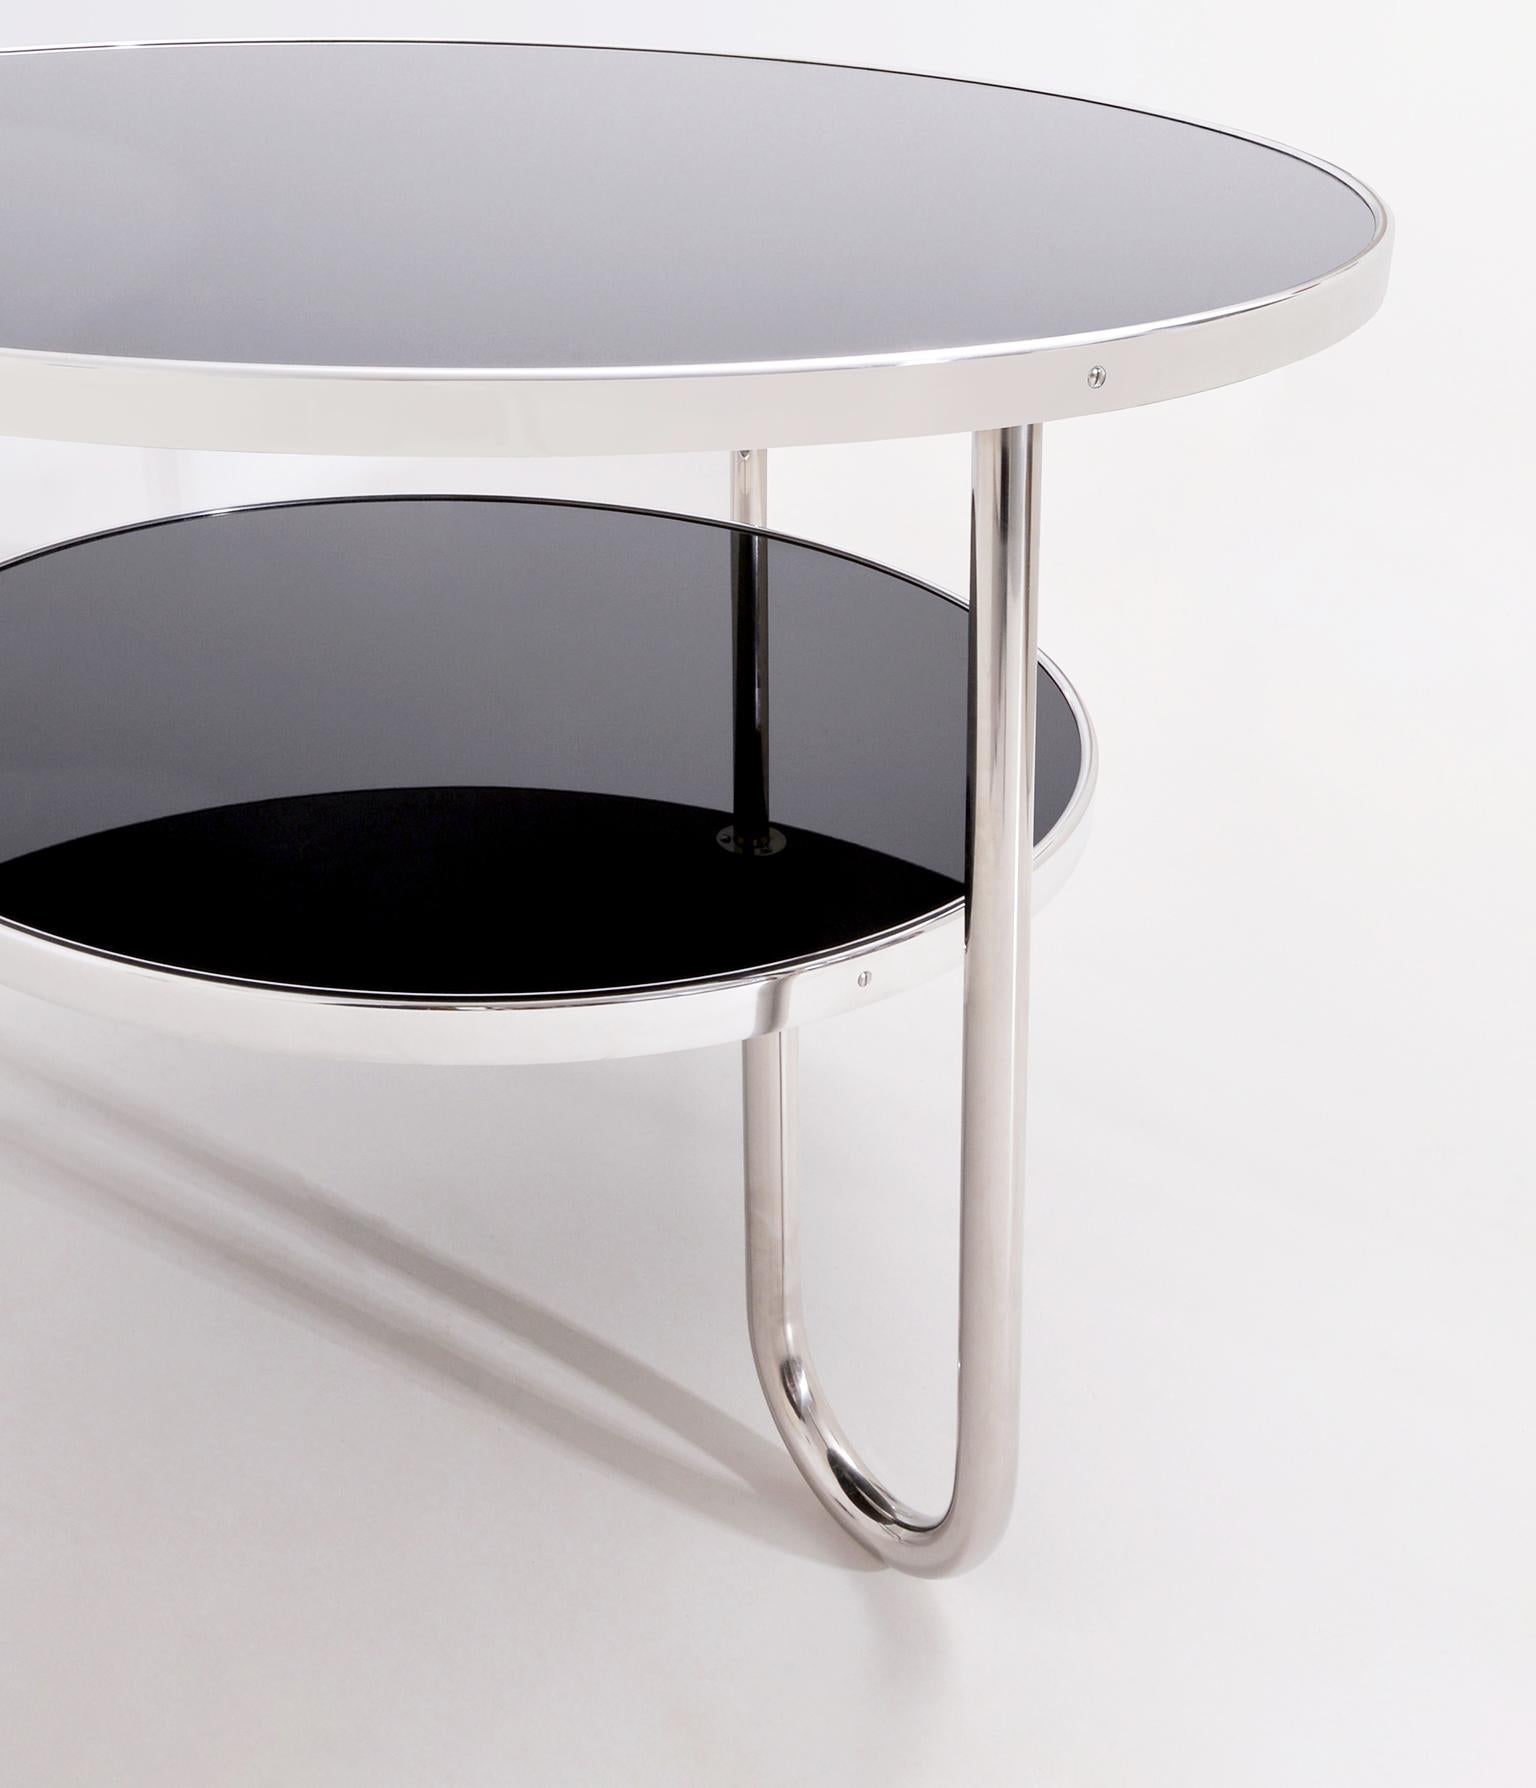 Aluminum Modernist Round Coffee Table, Chromium Plated Tubular Steel, Glass Tops, Germany For Sale